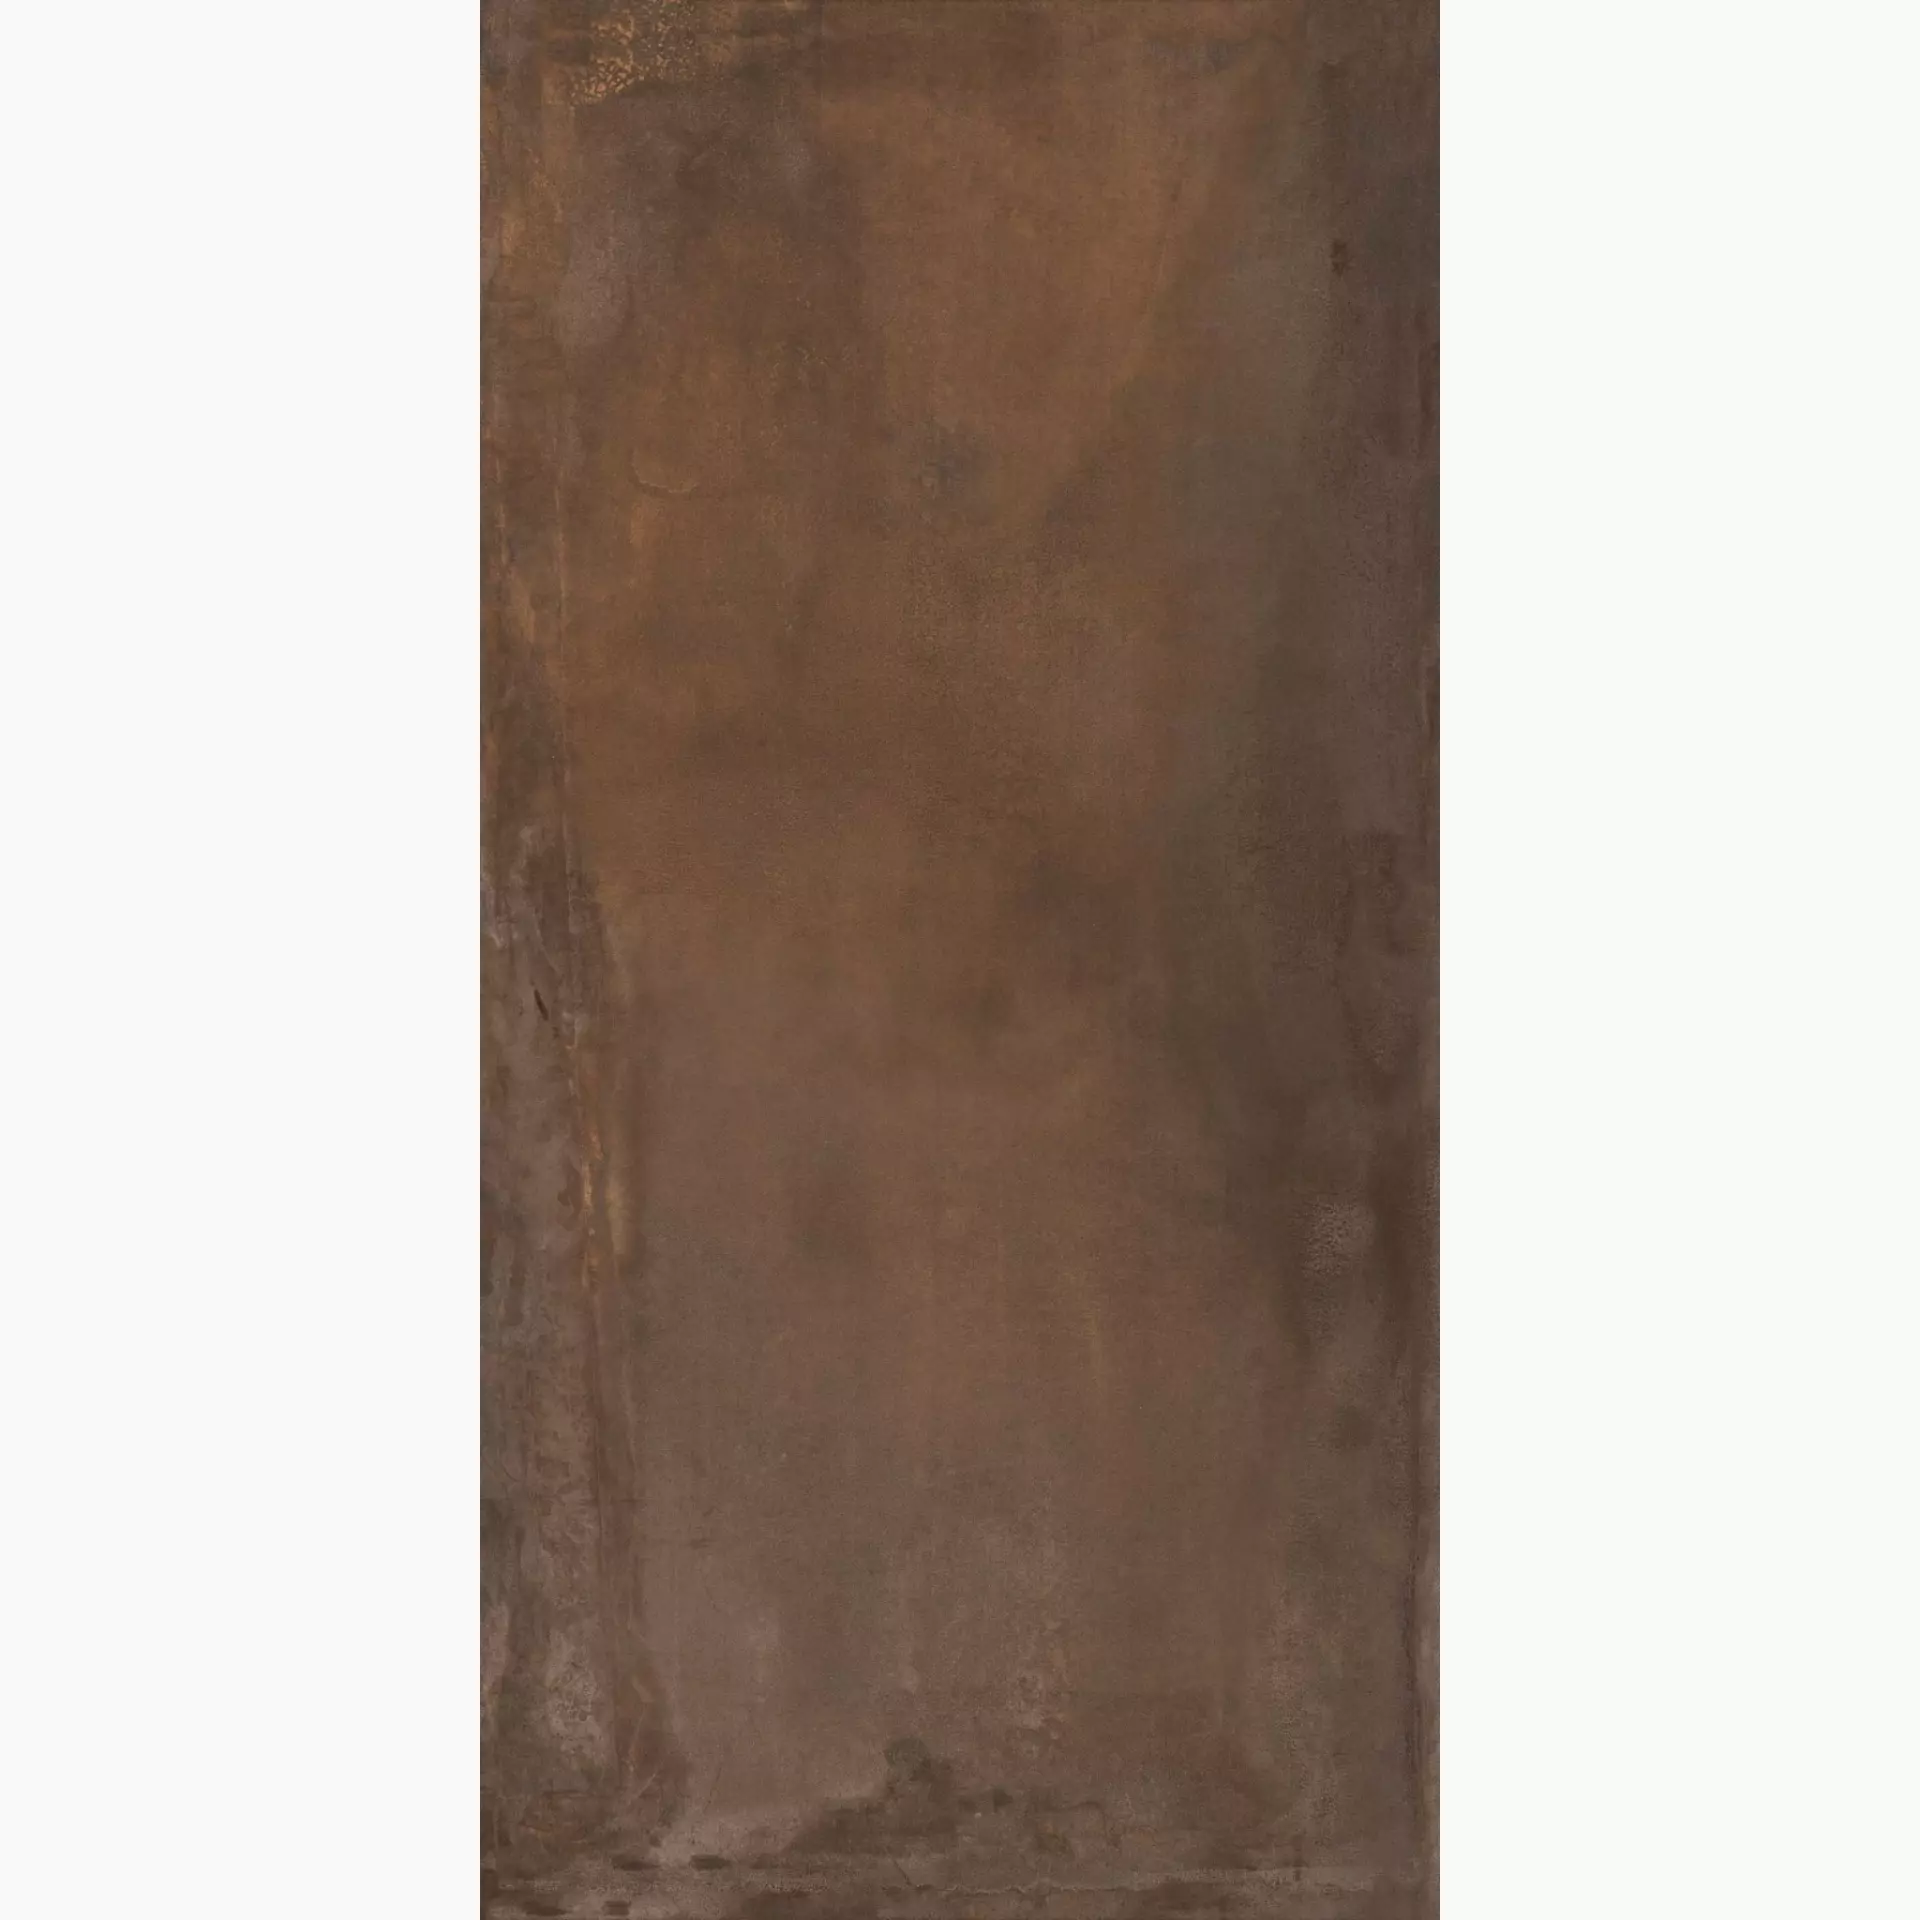 ABK Interno9 Rust Naturale I9R34300 60x120cm rectified 8,5mm